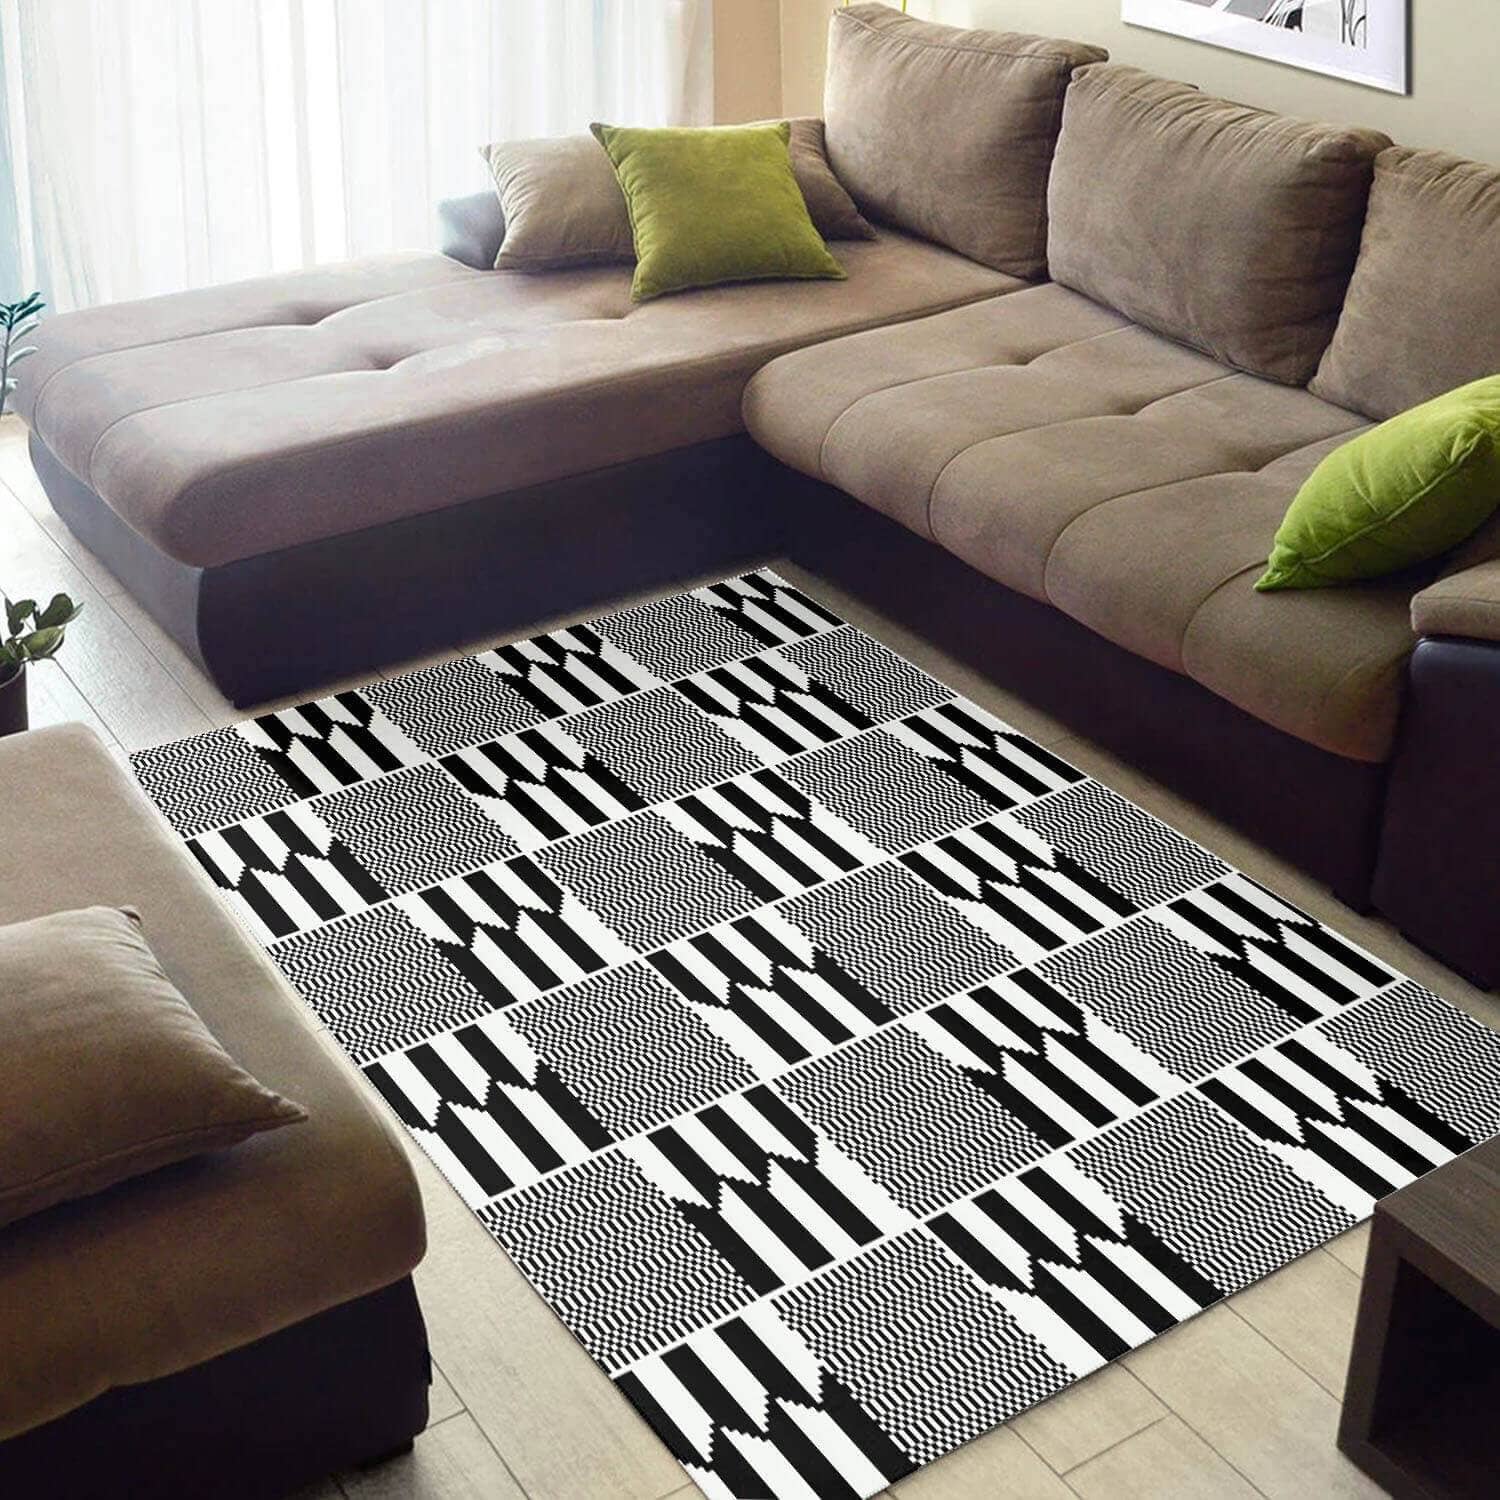 Beautiful African Adorable American Art Seamless Pattern Themed Inspired Home Rug